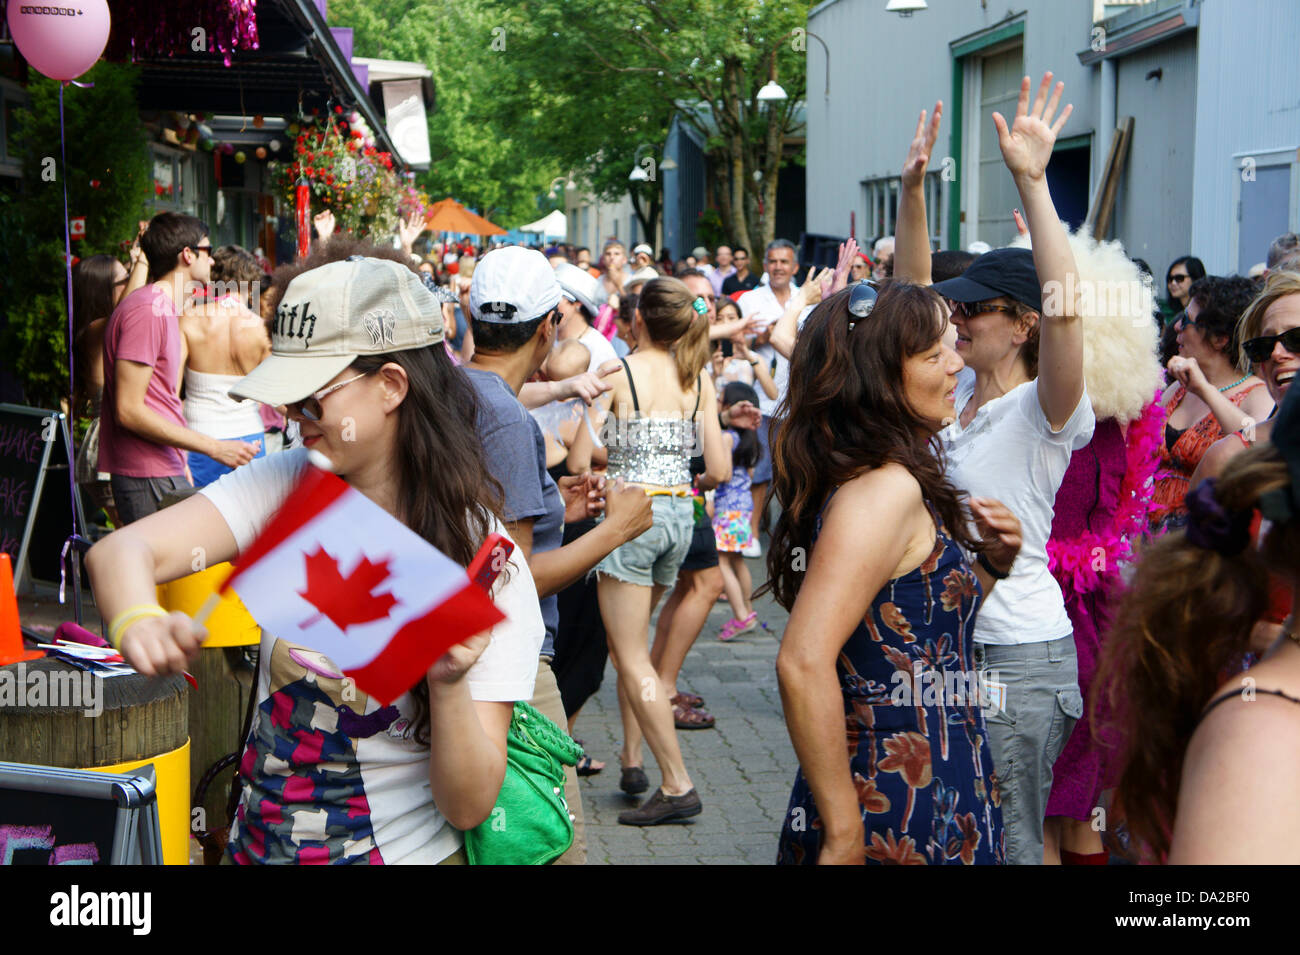 people-disco-dancing-outdoors-at-canada-